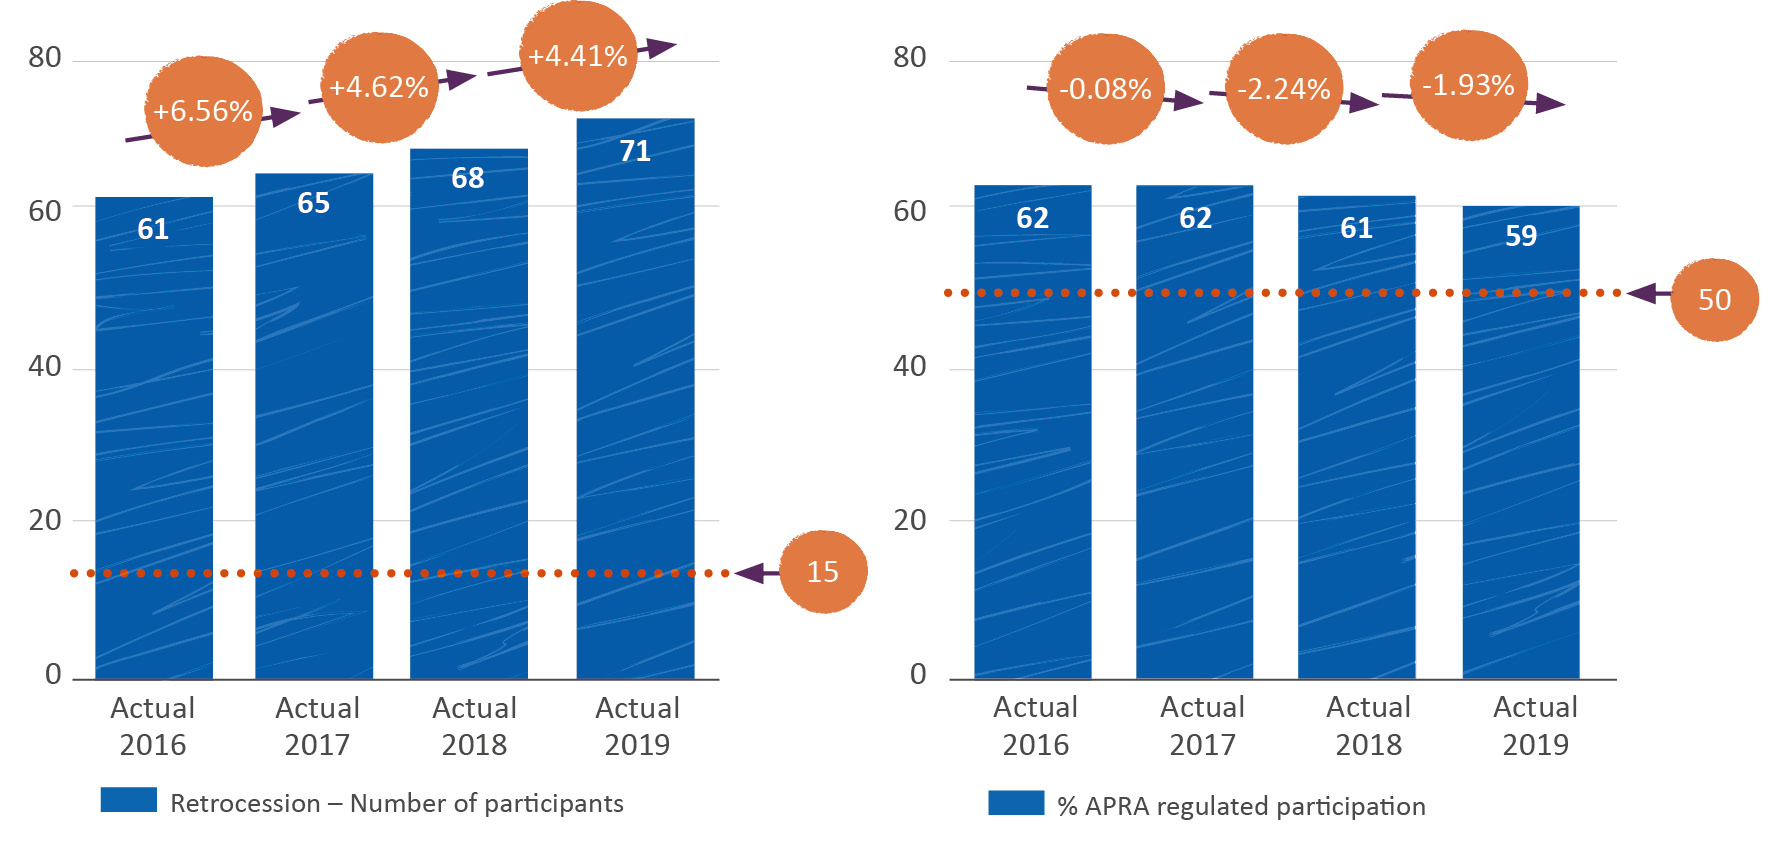 This bar graph illustrates the number of retrocessionaires that have participated in ARPC’s retrocession program each year from 2016 through to 2019. In 2016, 61 reinsurers participated; In 2017, 65 participated, up 6.56%; in 2018, 68 reinsurers participated, up 4.62%; and in 2019, 71 reinsurers participated, a 4.41% leap since 2018. The minimum target number of retrocessionaires is 15. The number of APRA-regulated participants in ARPC’s retrocession program remained relatively steady from 2016 to 2019, with 62% in 2016 and 2017; 61% in 2018; and 59 percent in 2019. The target percentage of capacity from ARPA regulated reinsurers is 50%.